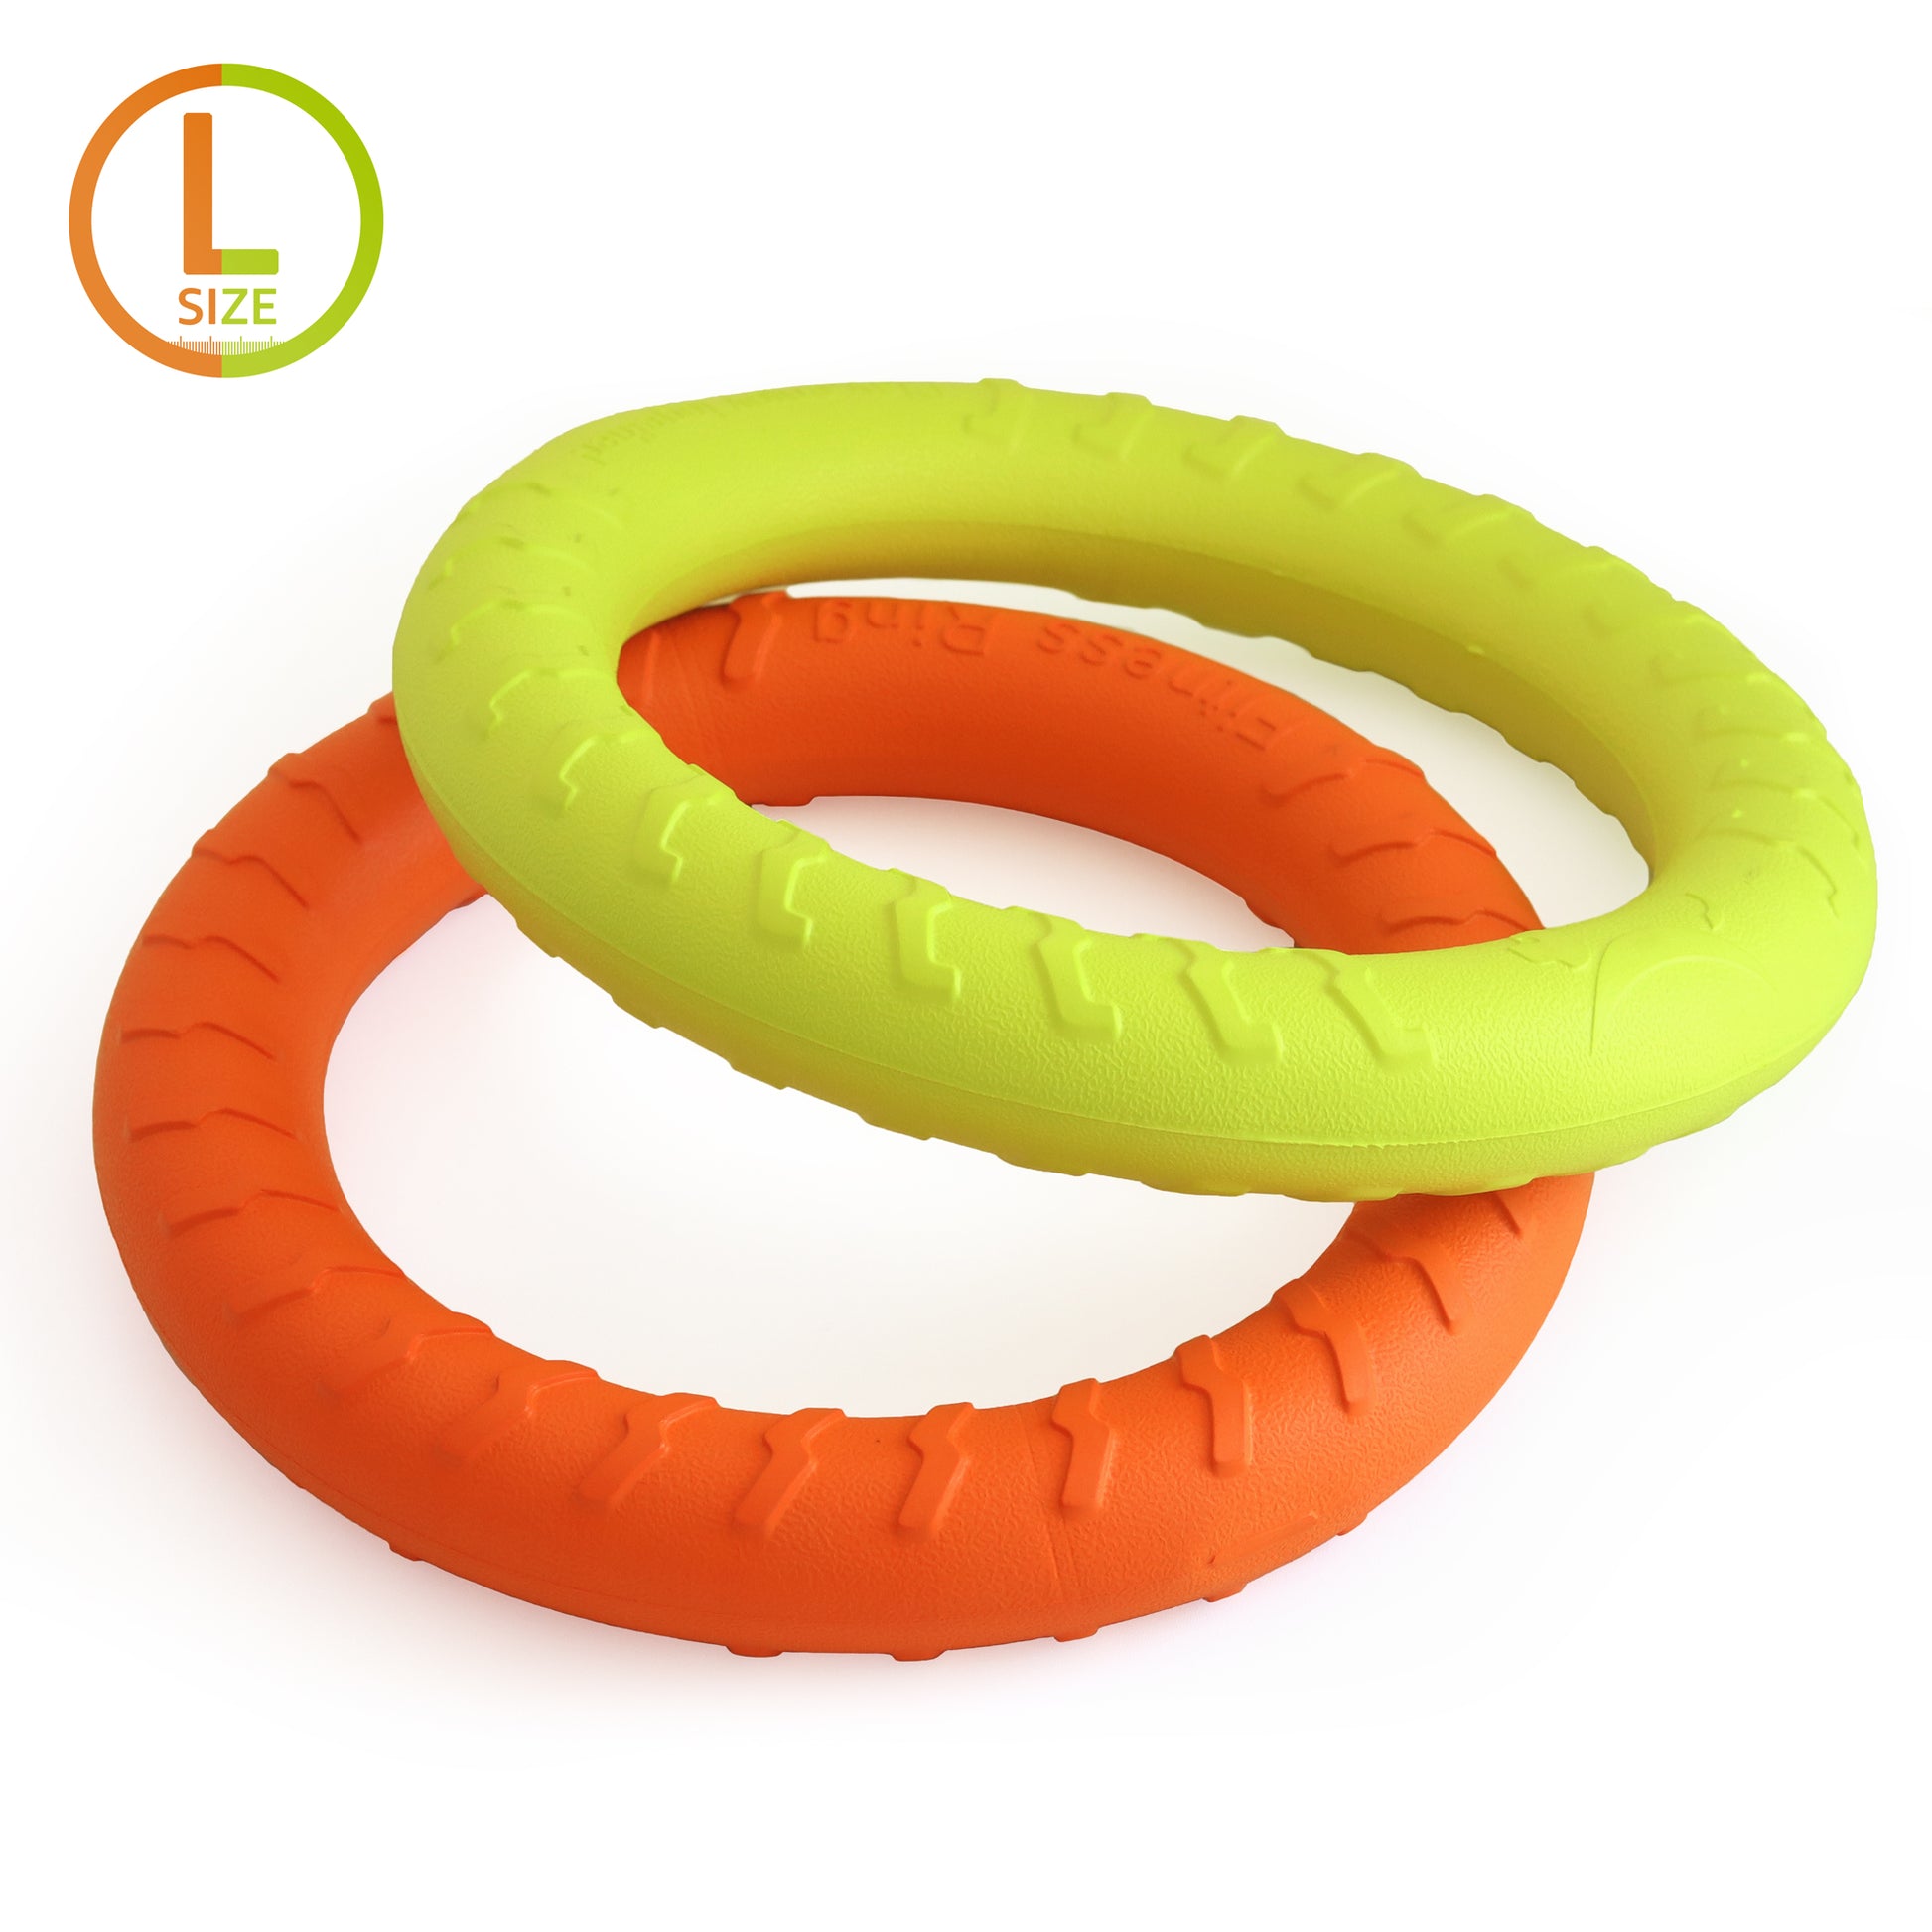 Dog Ring Toy Training ring for dog 2 pack_color green orange L size